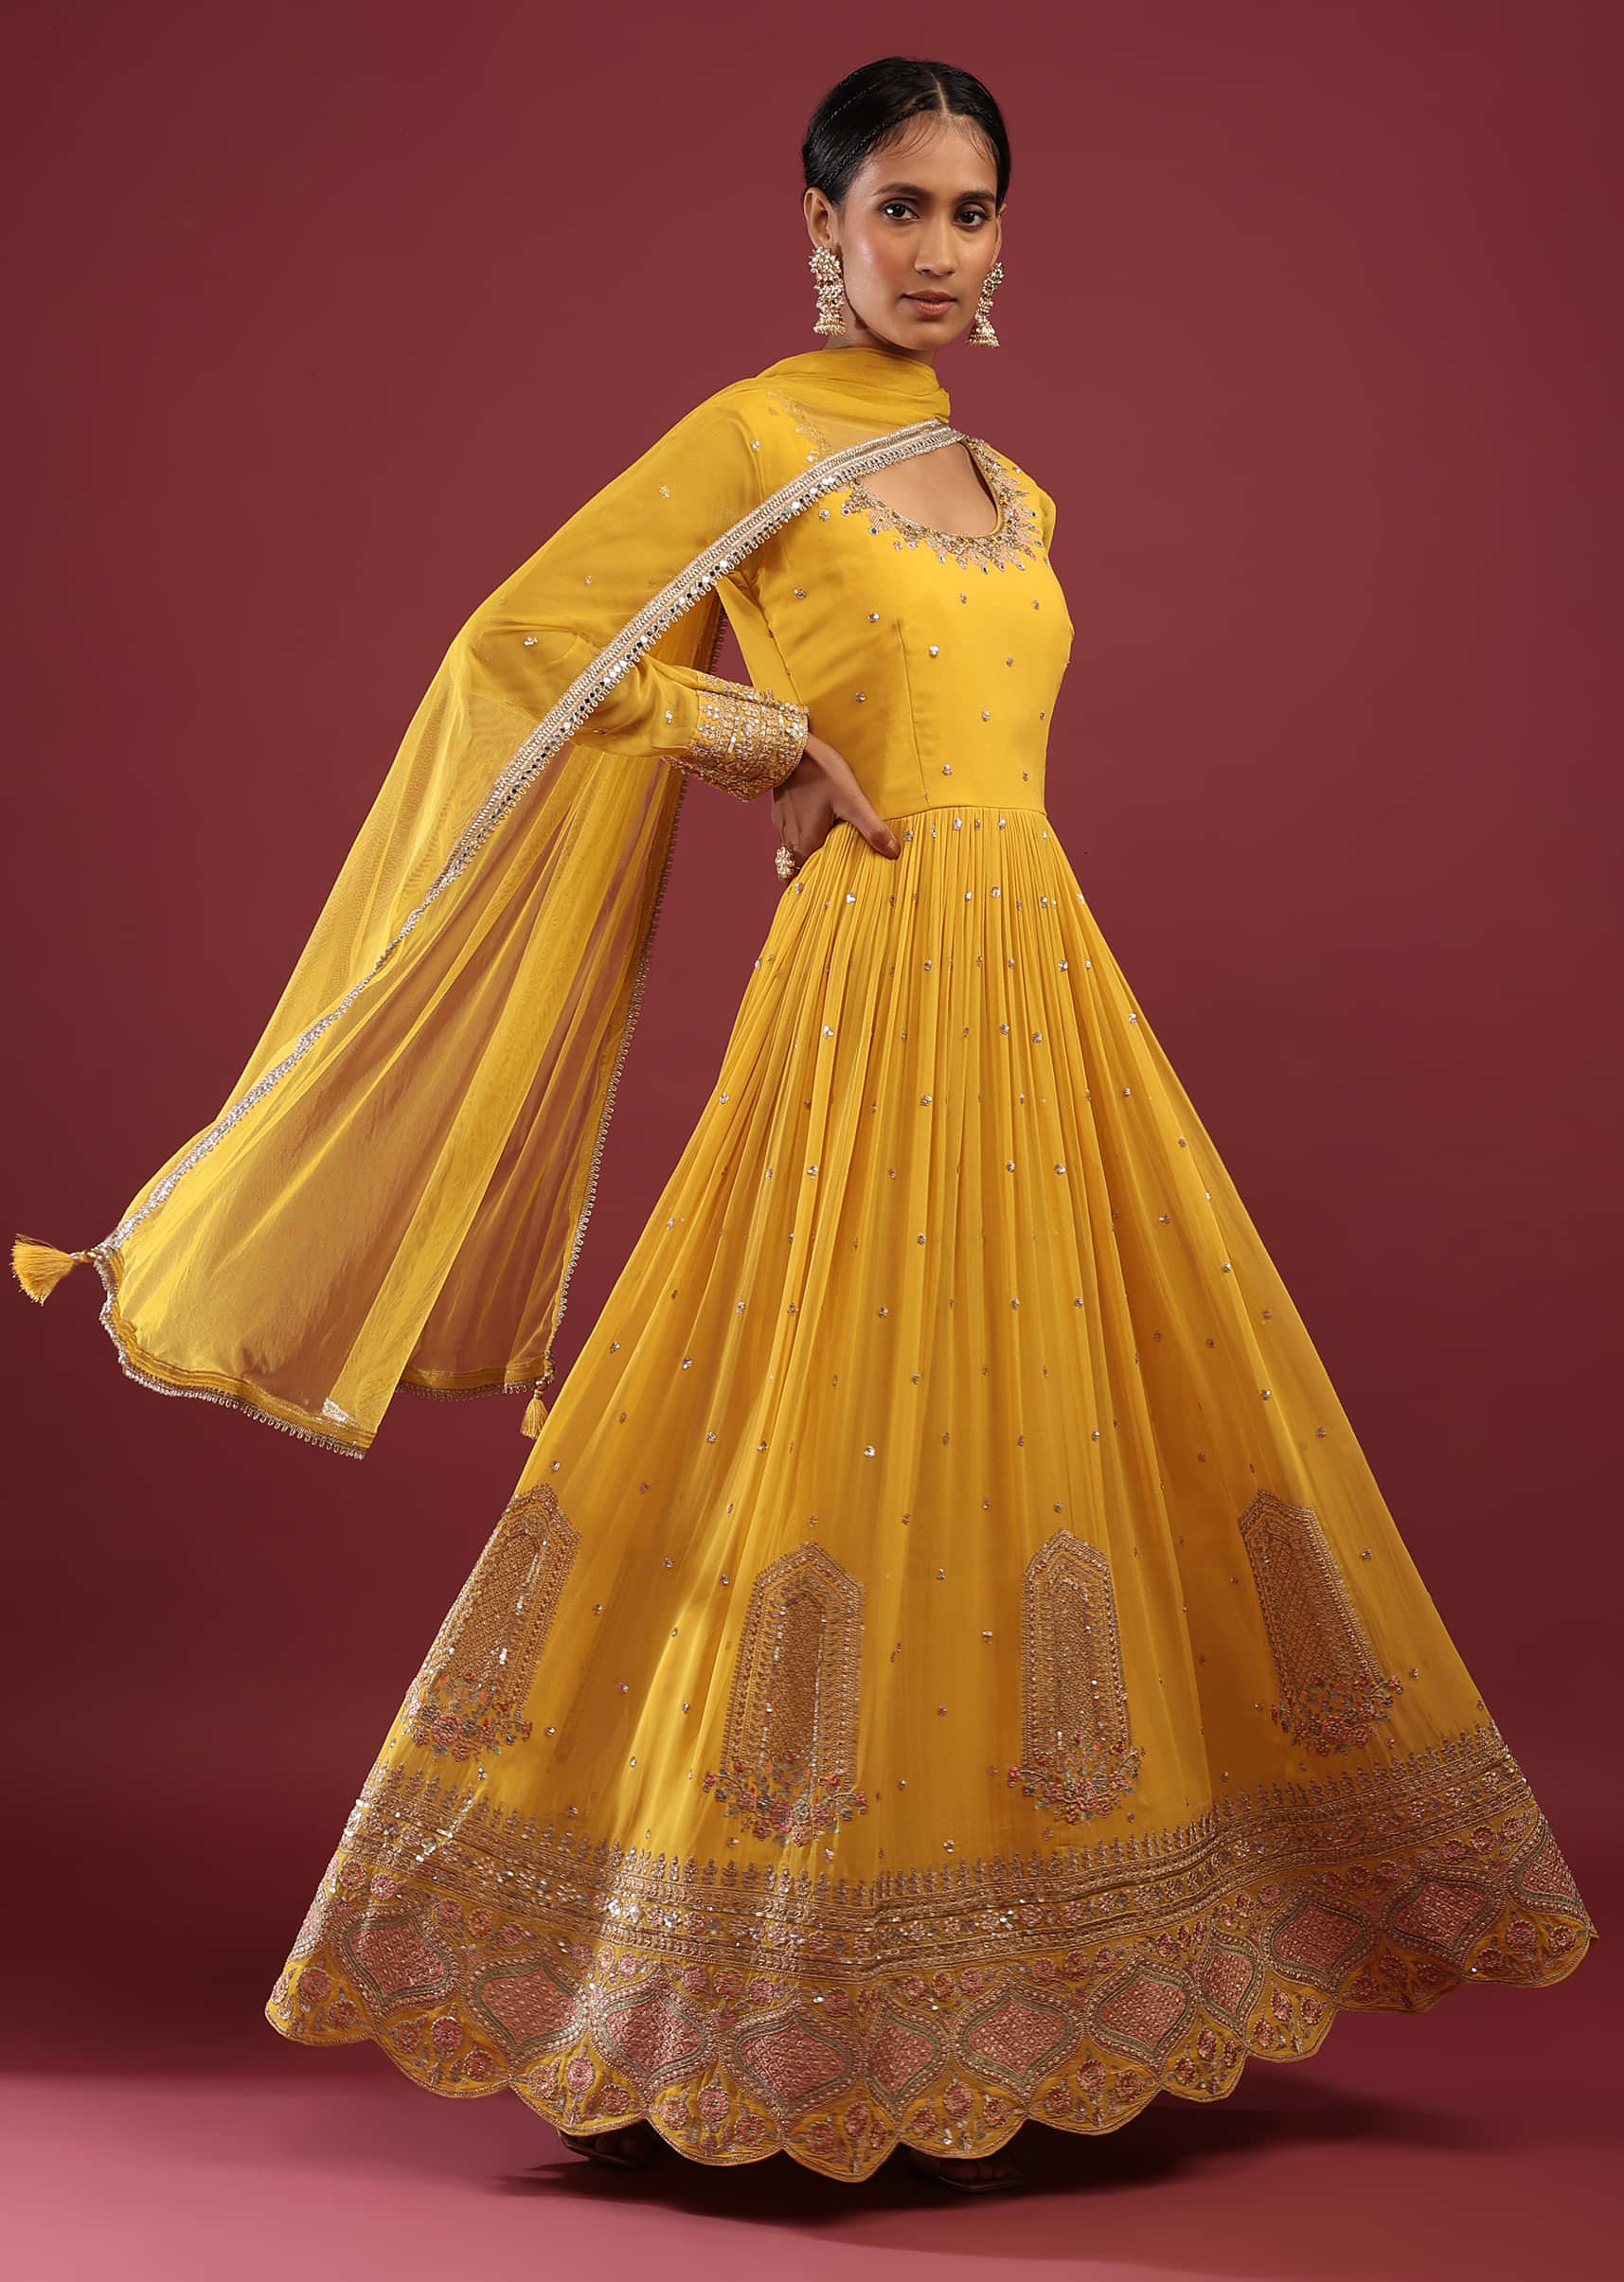 Canary Yellow Anarkali Suit In Georgette With Multicolored Resham And Zari Embroidered Mughal Design